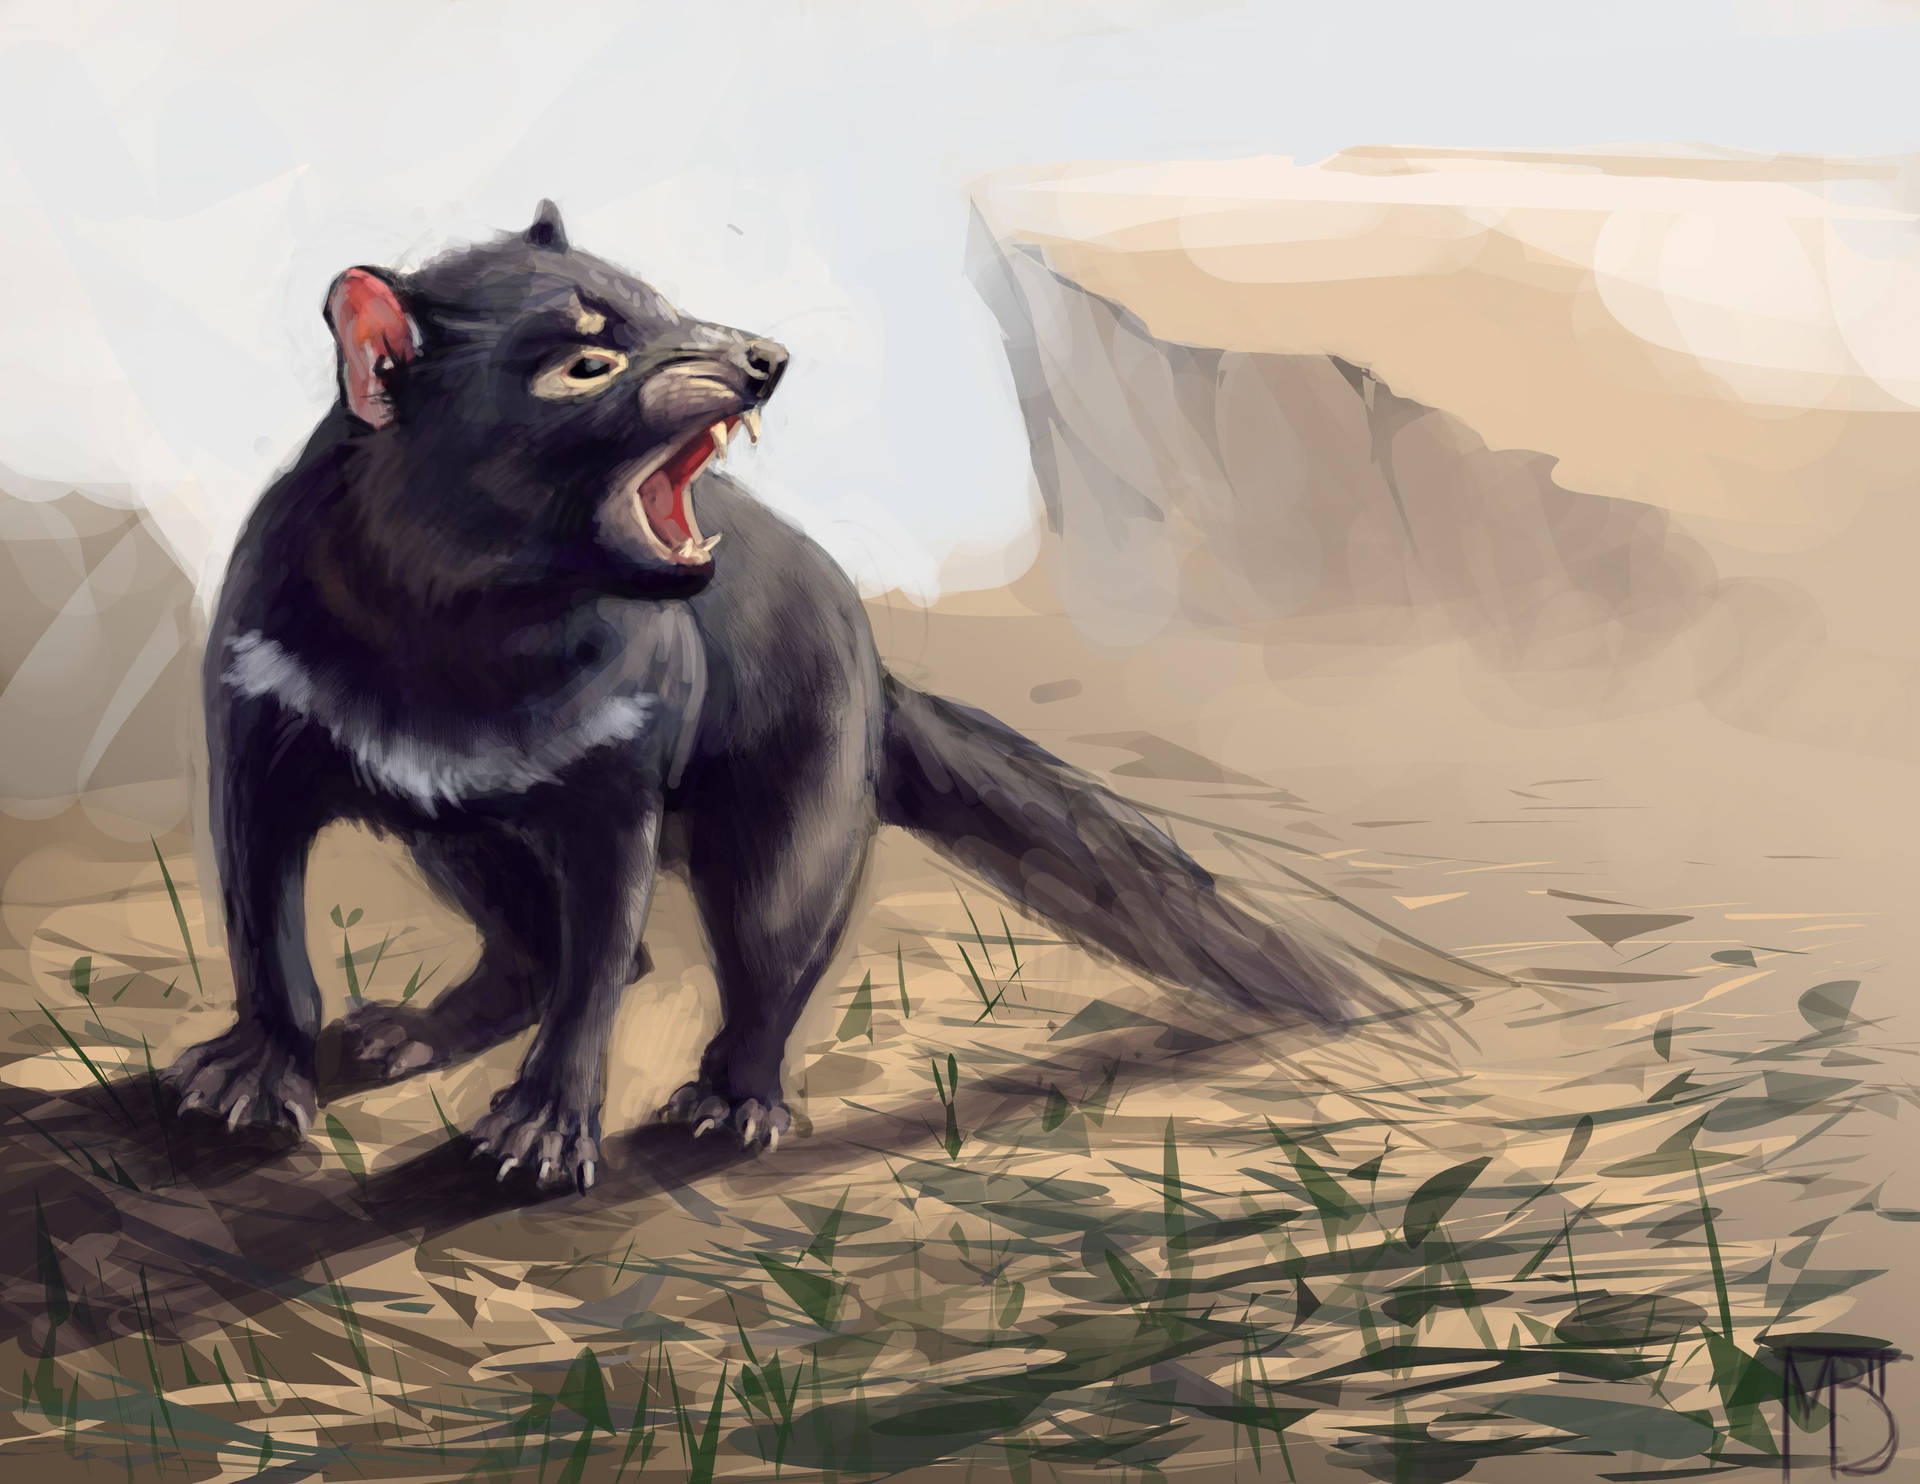 This photo captures the fearsome beauty of Tasmanian Devil Wallpaper